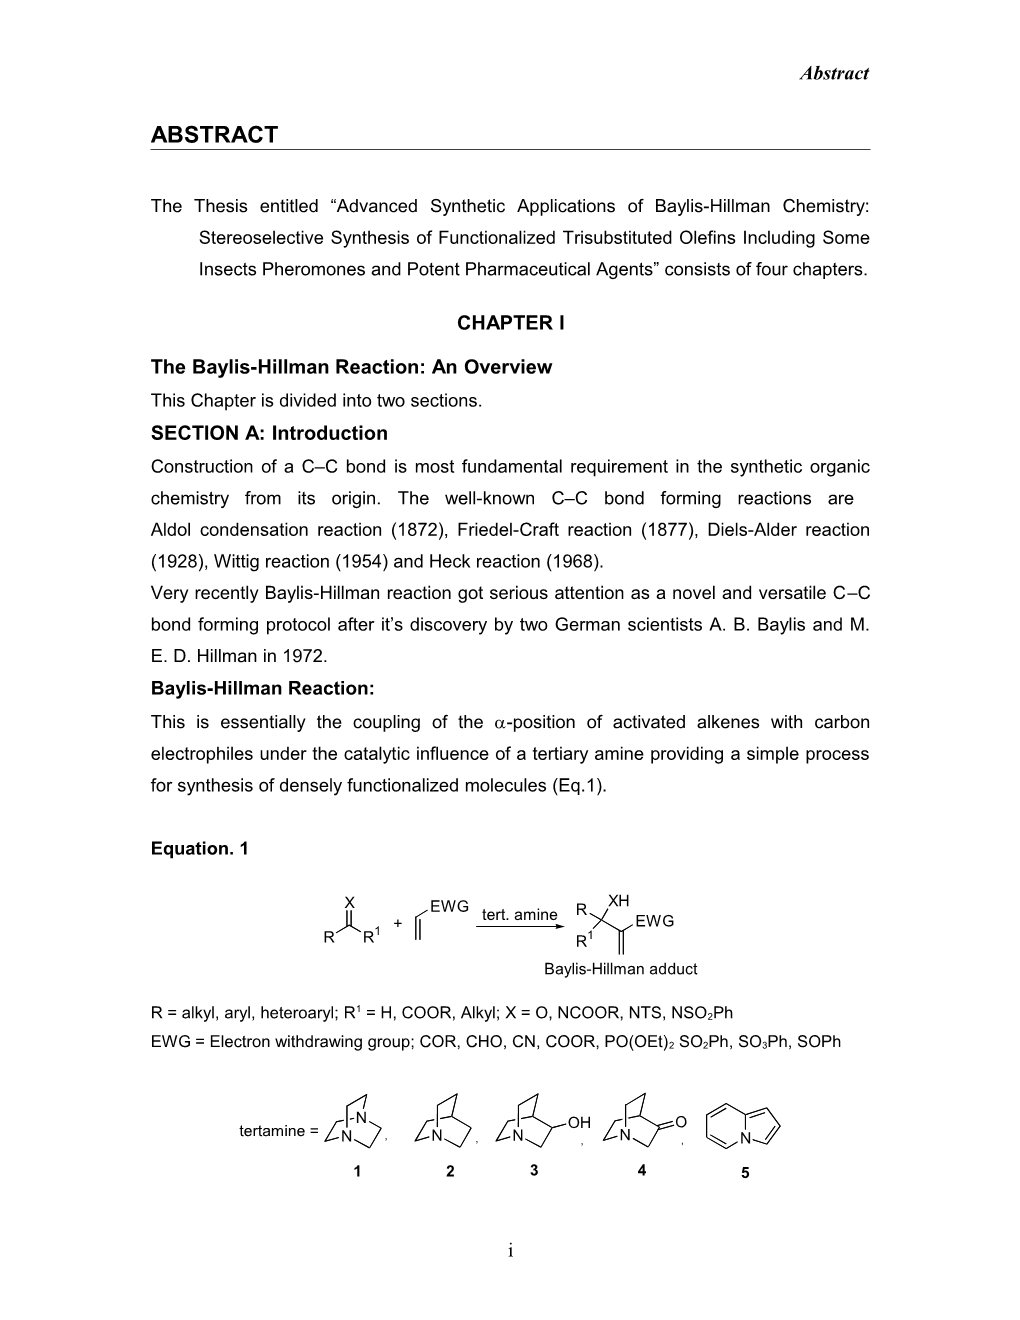 The Baylis-Hillman Reaction: an Overview